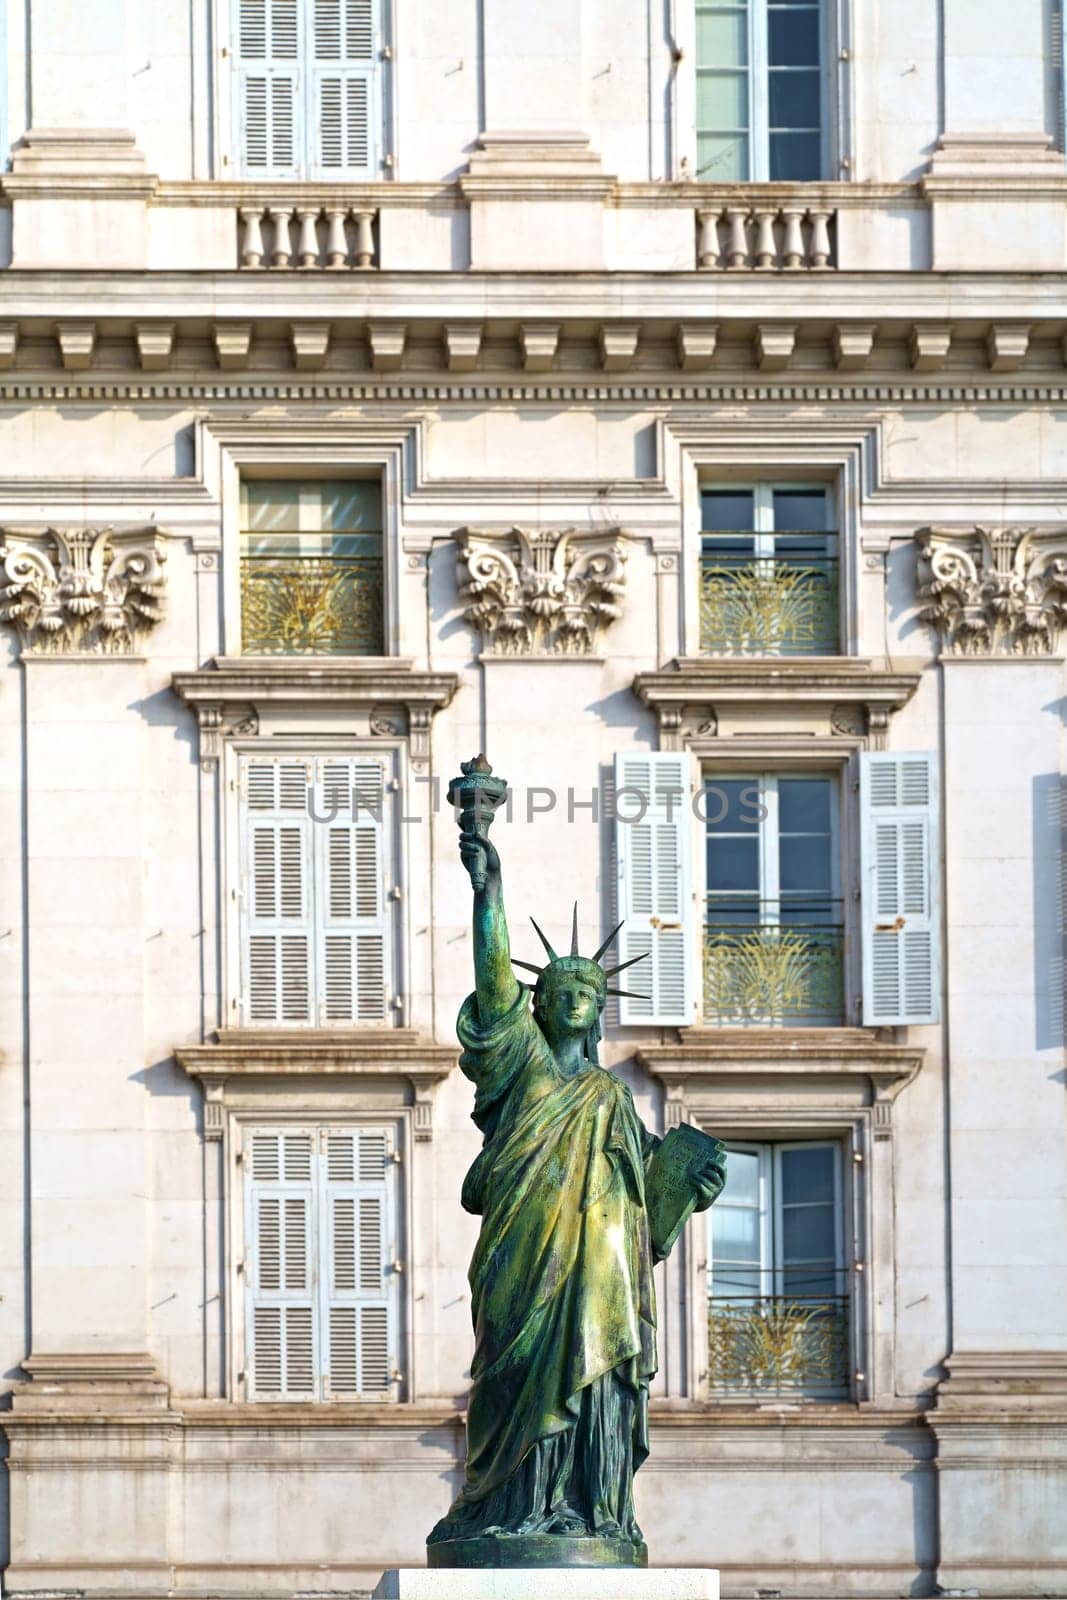 Small replica of the Statue of Liberty on Promenade des Anglais in Nice, France. Statue is made by Bartholdi and is one of several statues which helped him create the huge New York statue by aprilphoto